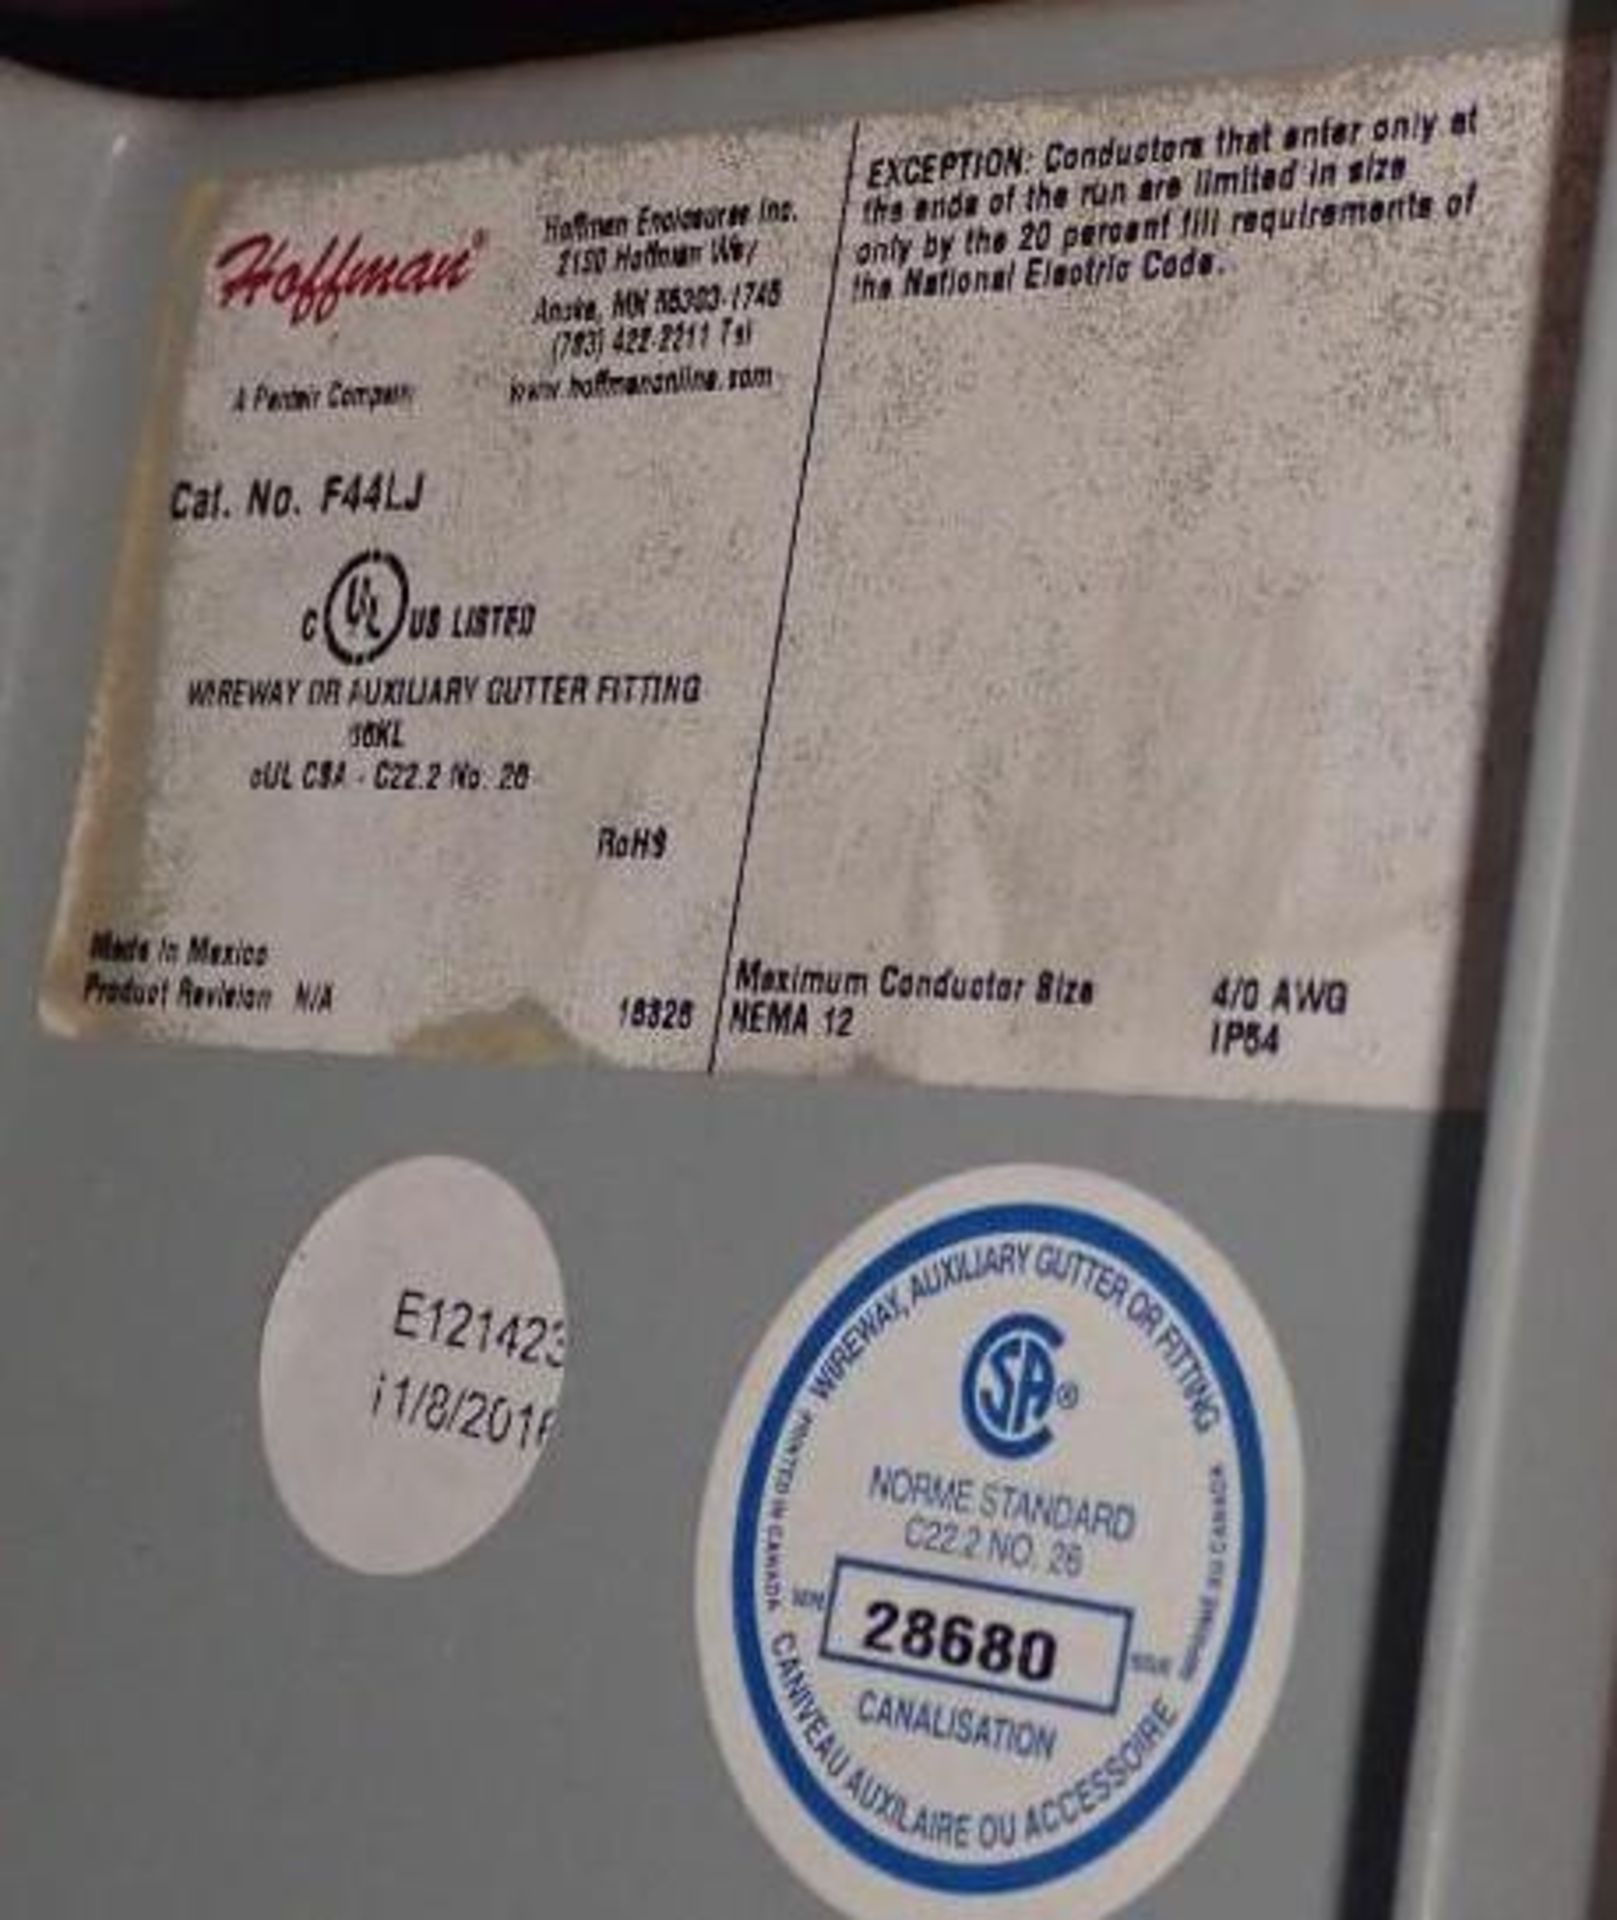 Lot of Hoffman Electrical Units - Image 9 of 9